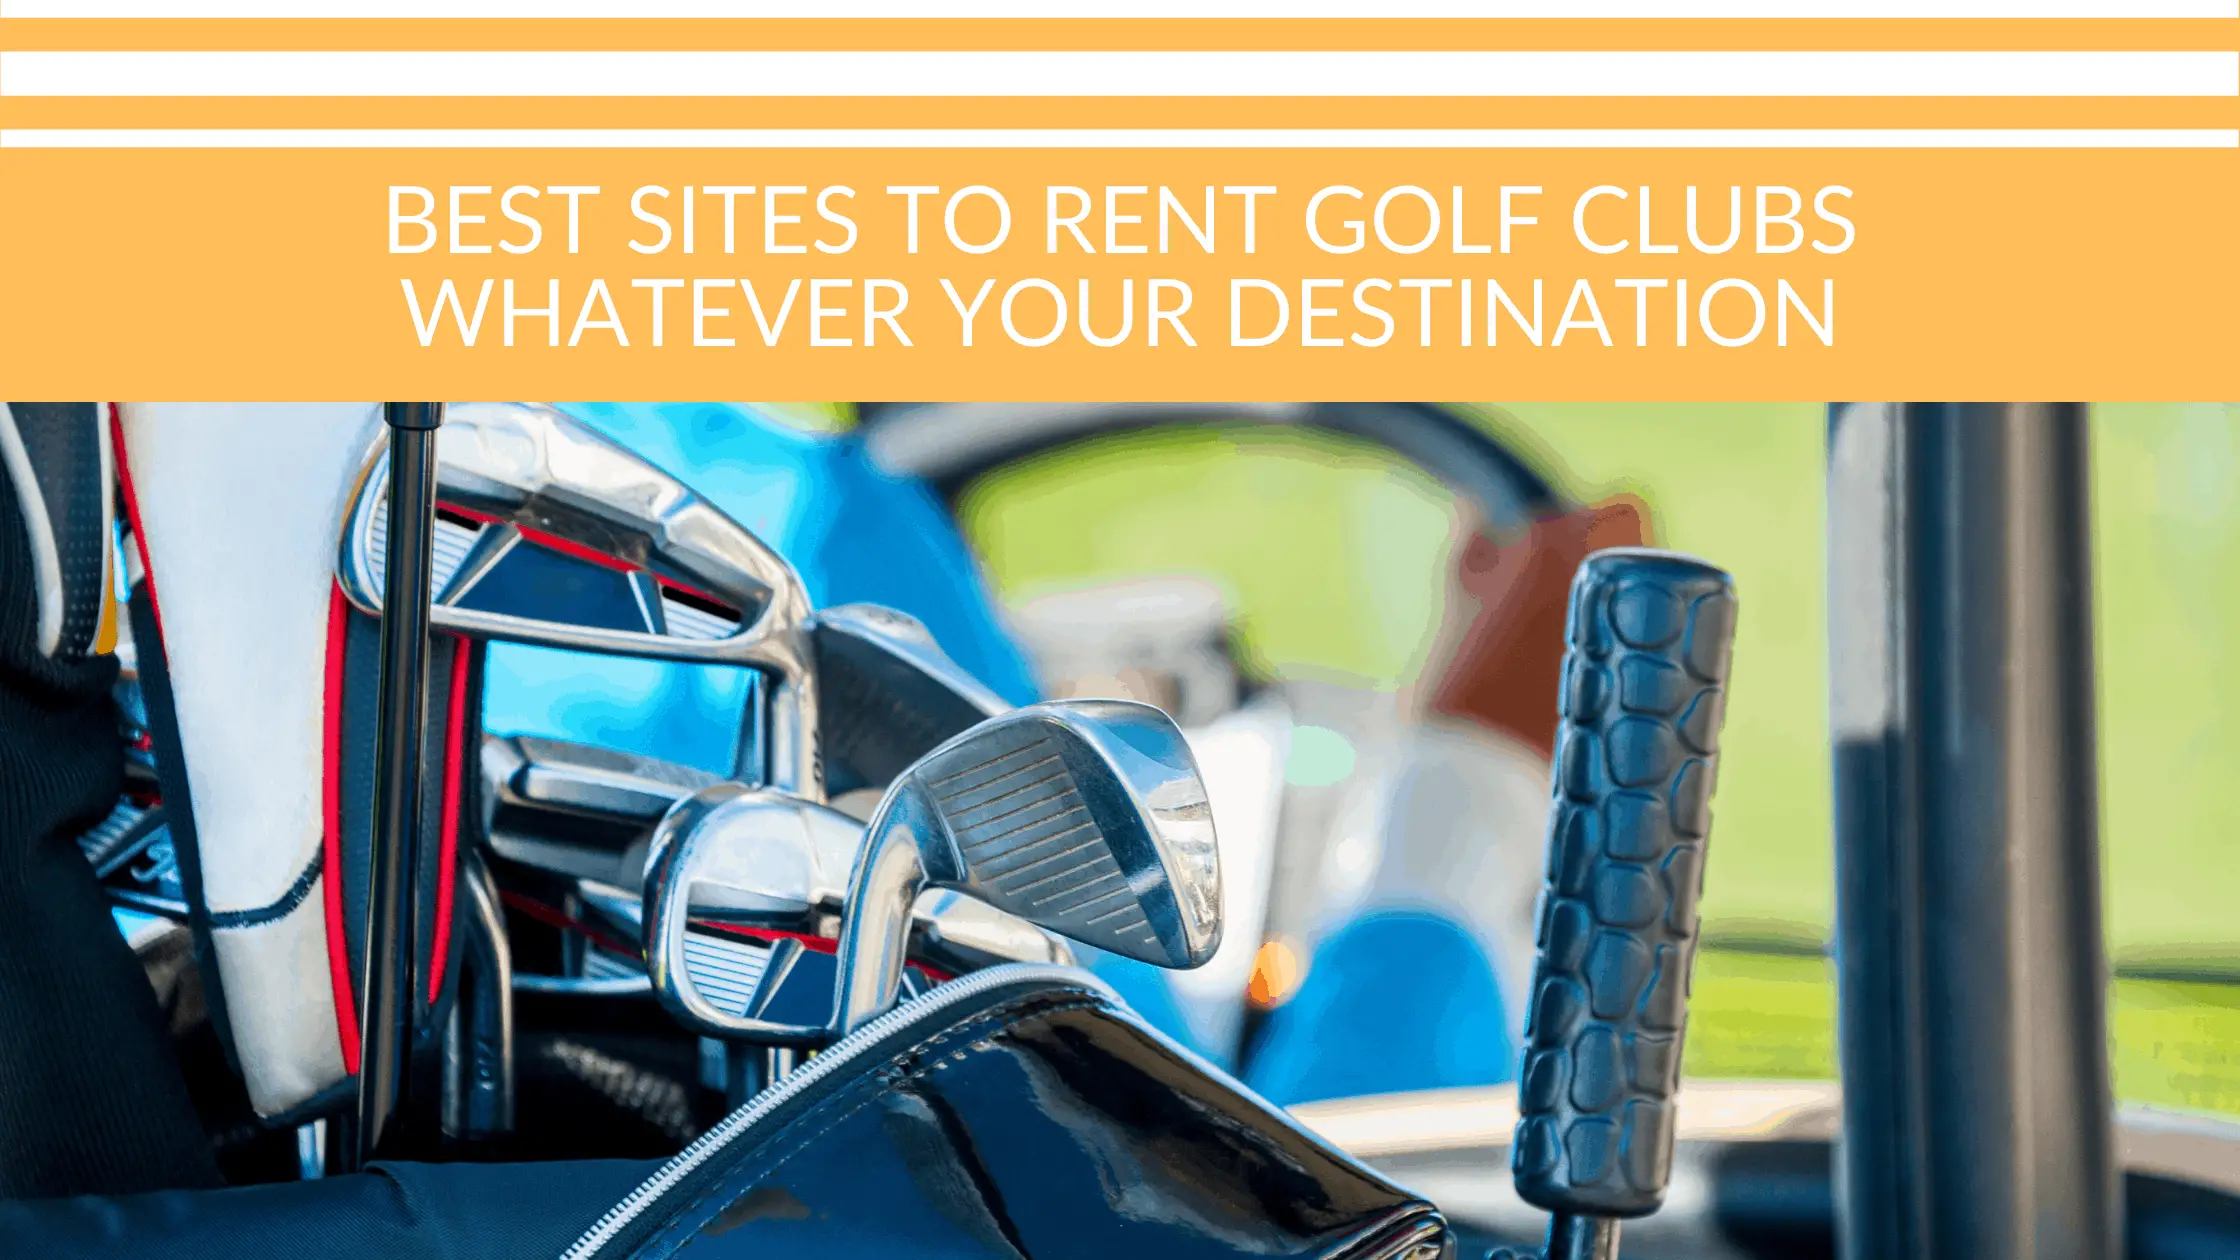 Want to Rent Golf Clubs Anywhere? Here Are the Best Sites